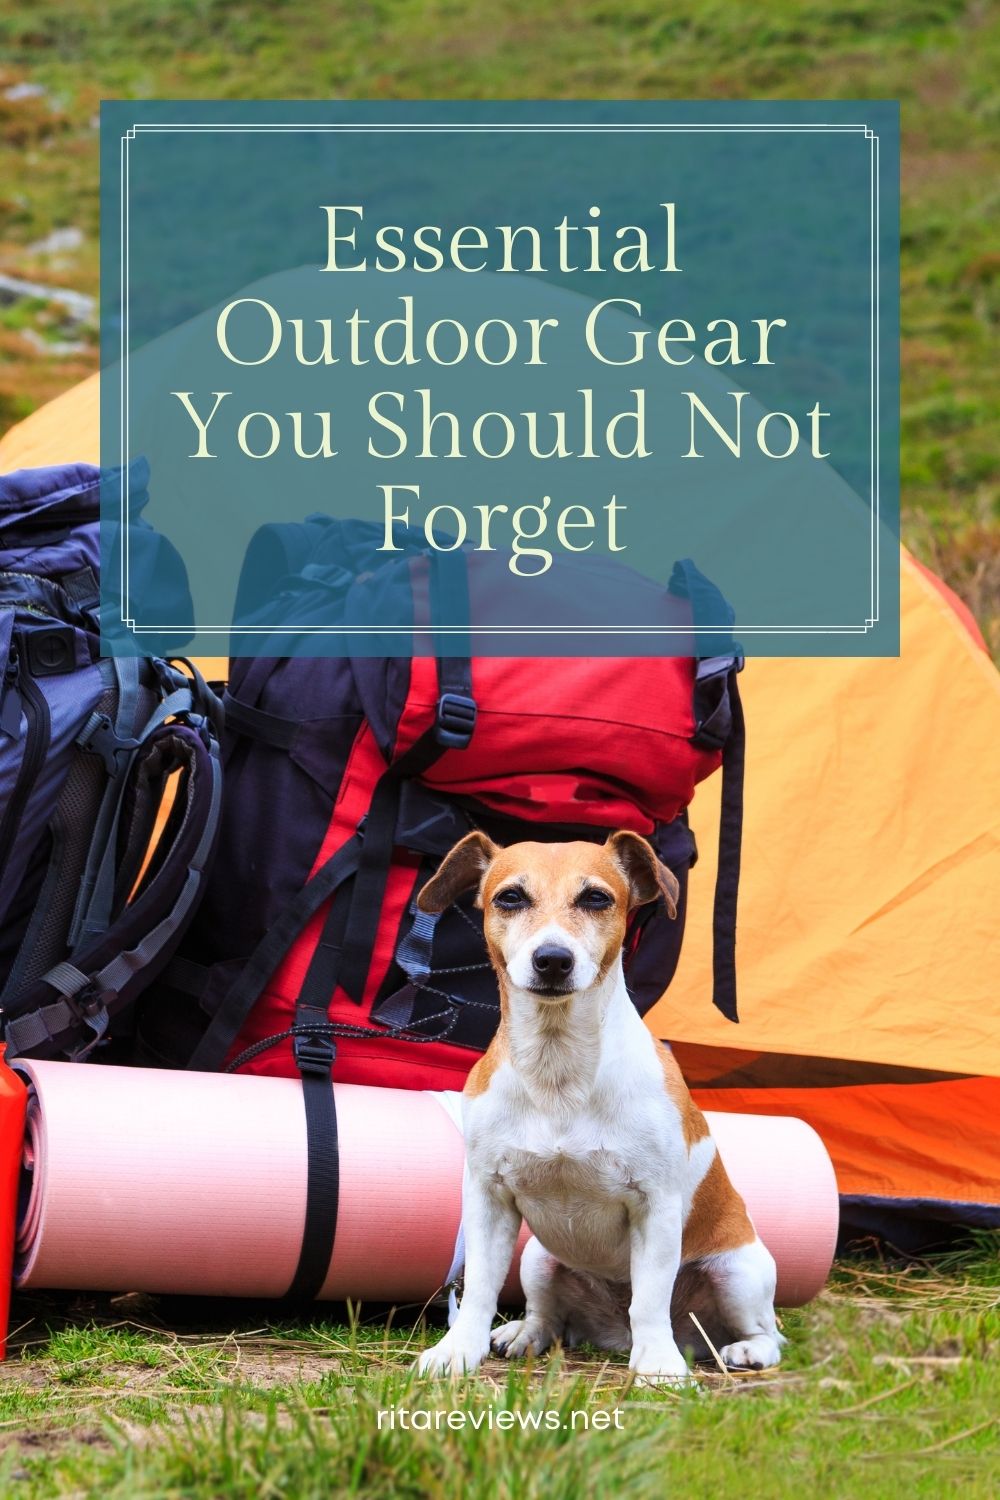 Essential Outdoor Gear You Should Not Forget (1)